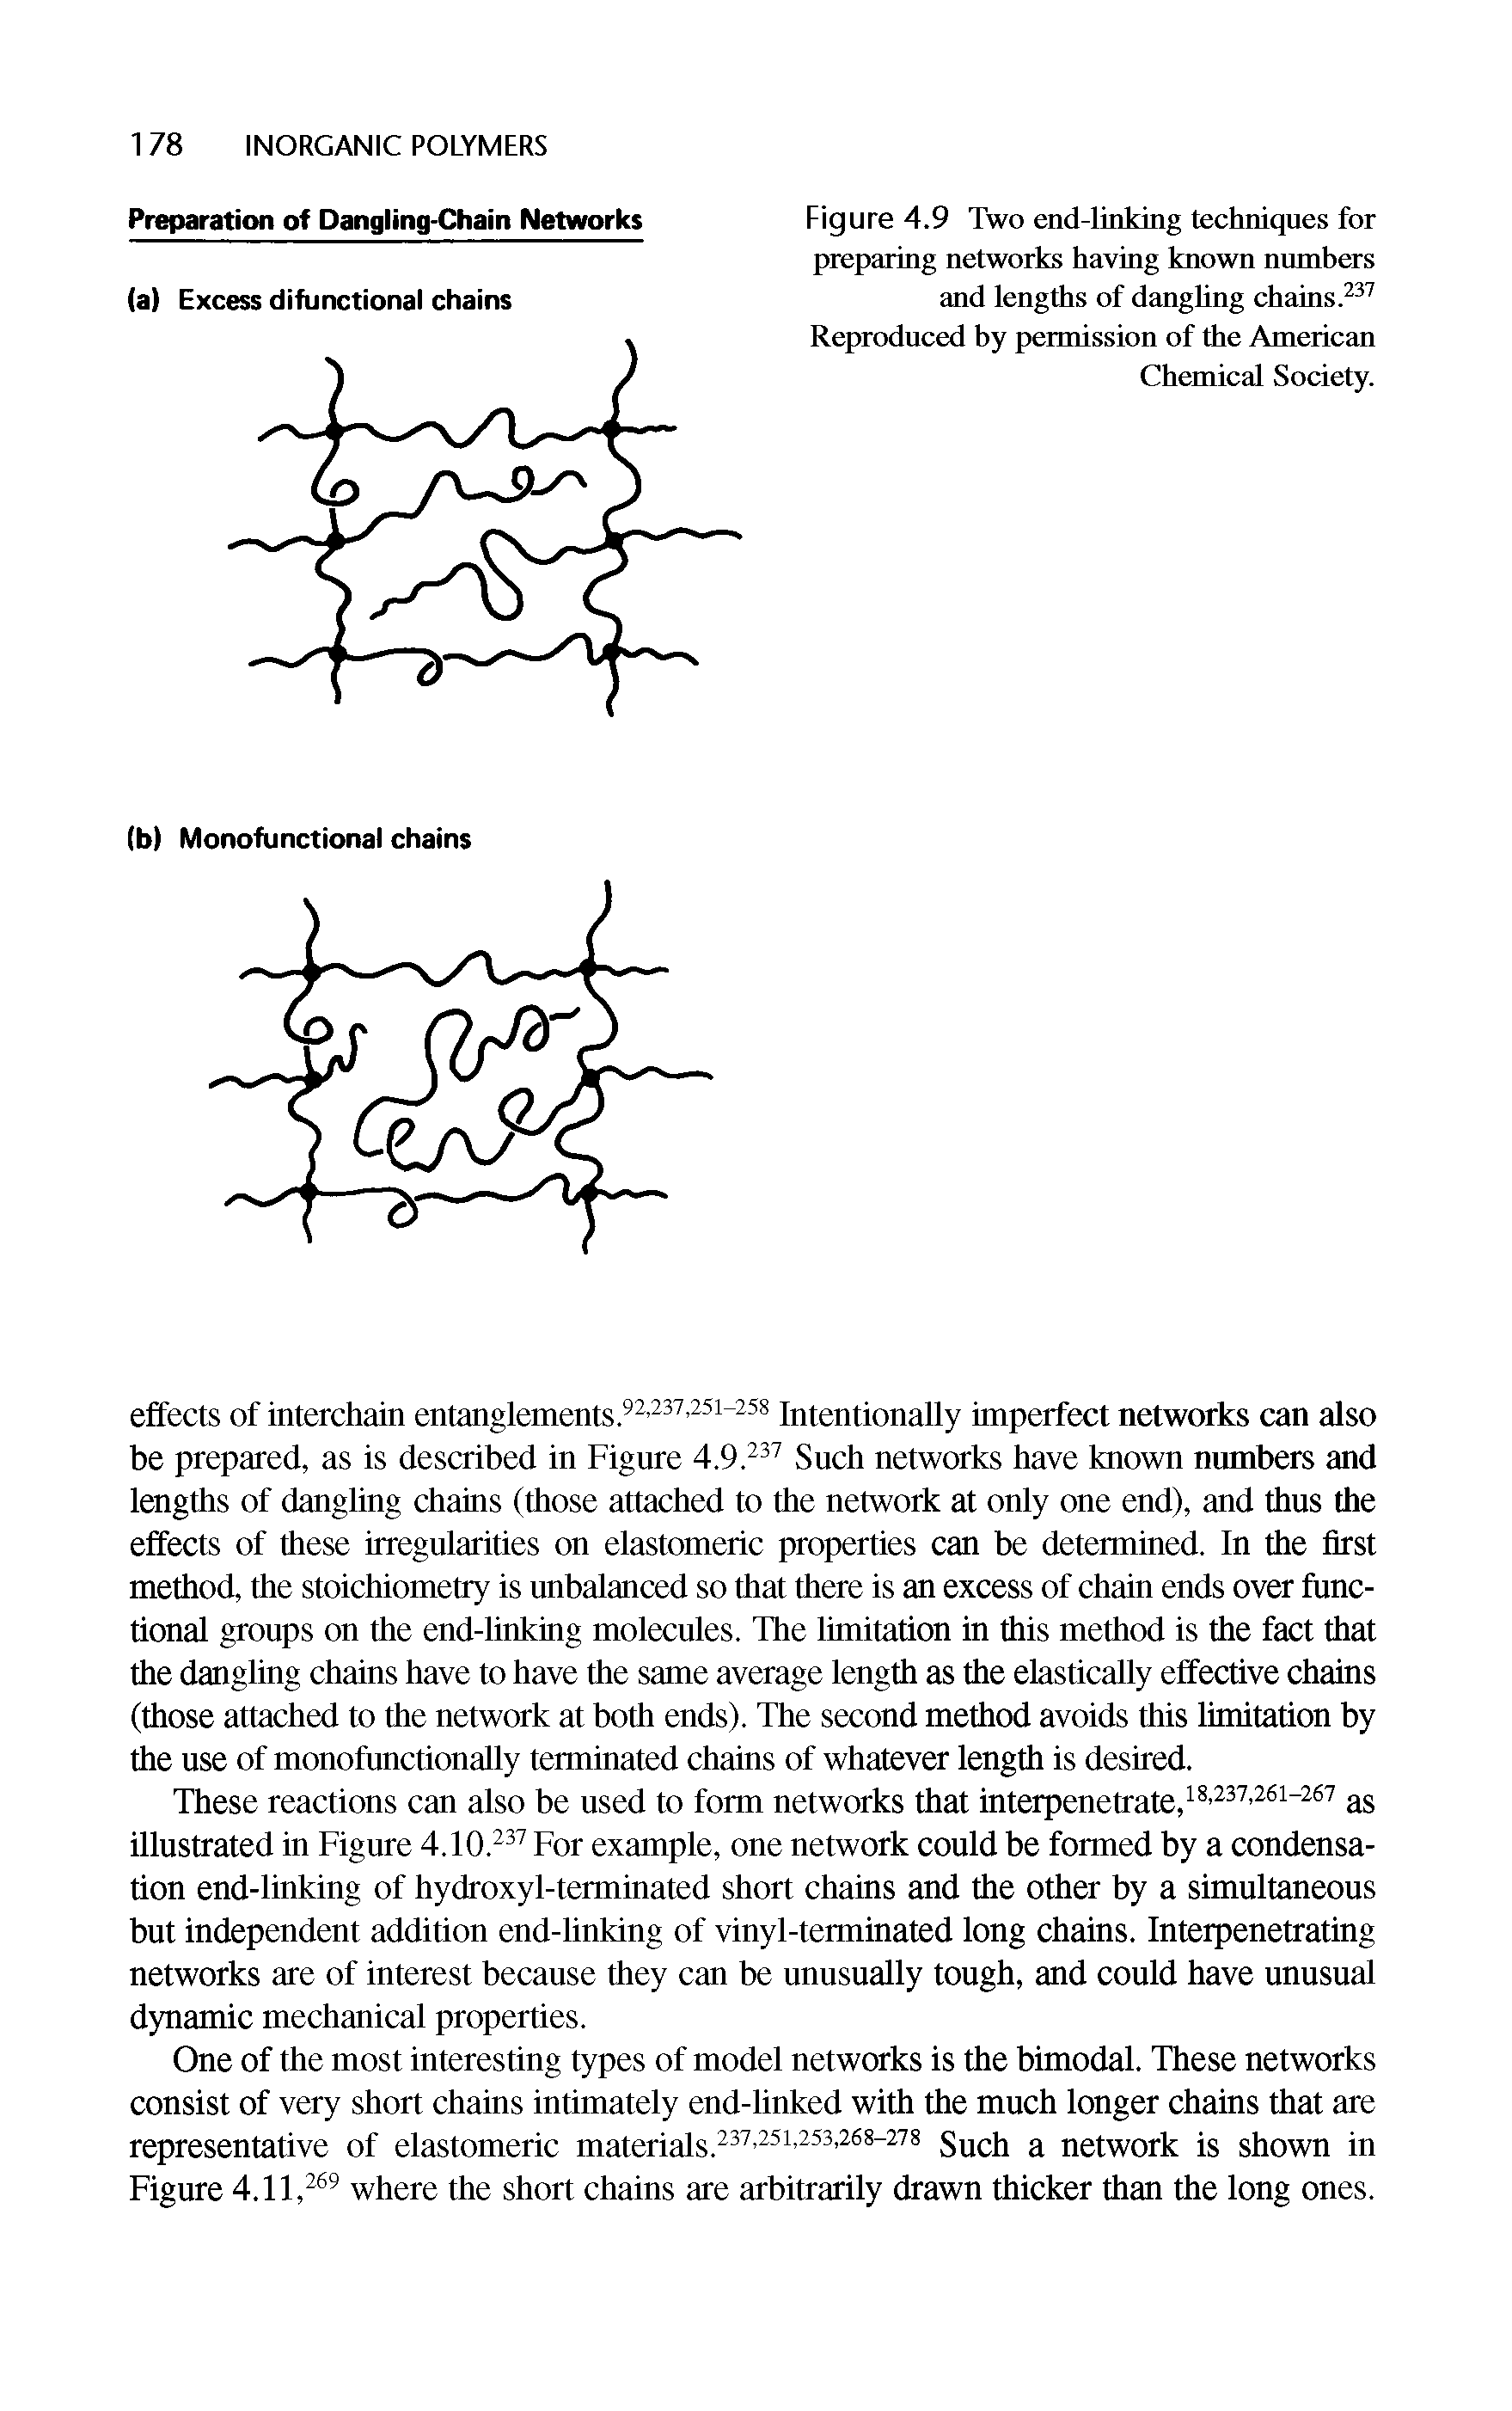 Figure 4.9 Two end-linking techniques for preparing networks having known numbers and lengths of dangling chains.237 Reproduced by permission of the American Chemical Society.